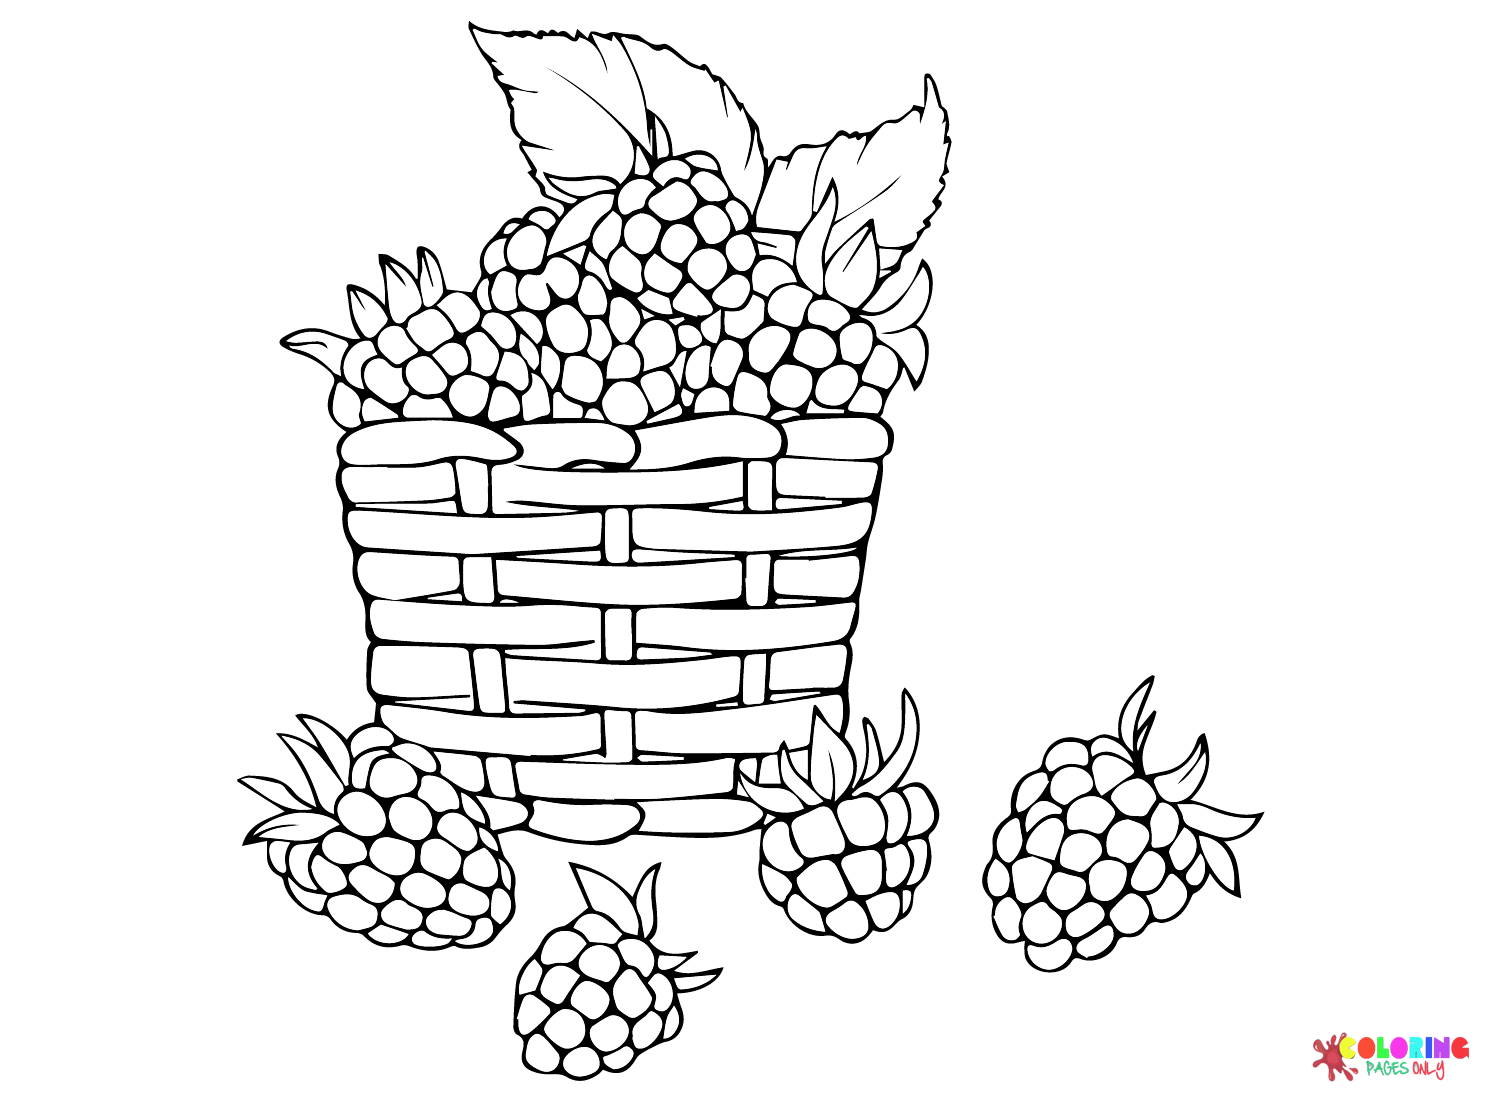 Basket Blackberry Coloring Page